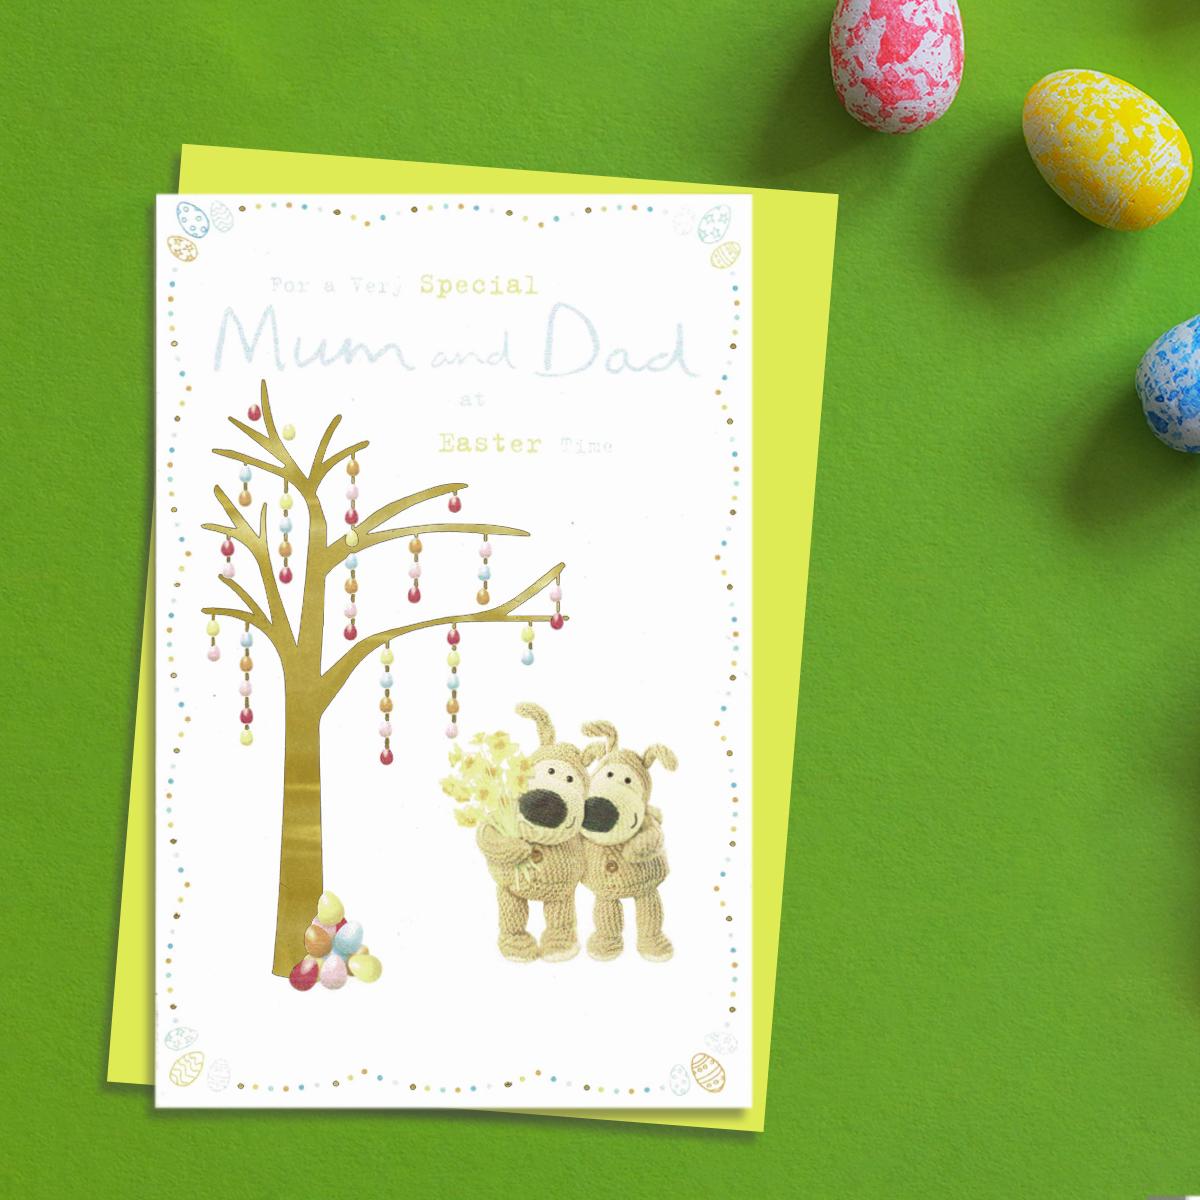 ' For A Very Special Mum And Dad At Easter Time' Card Featuring Boofle Bear With a Tree Filled With Hanging Easter Eggs! Complete With Yellow Envelope